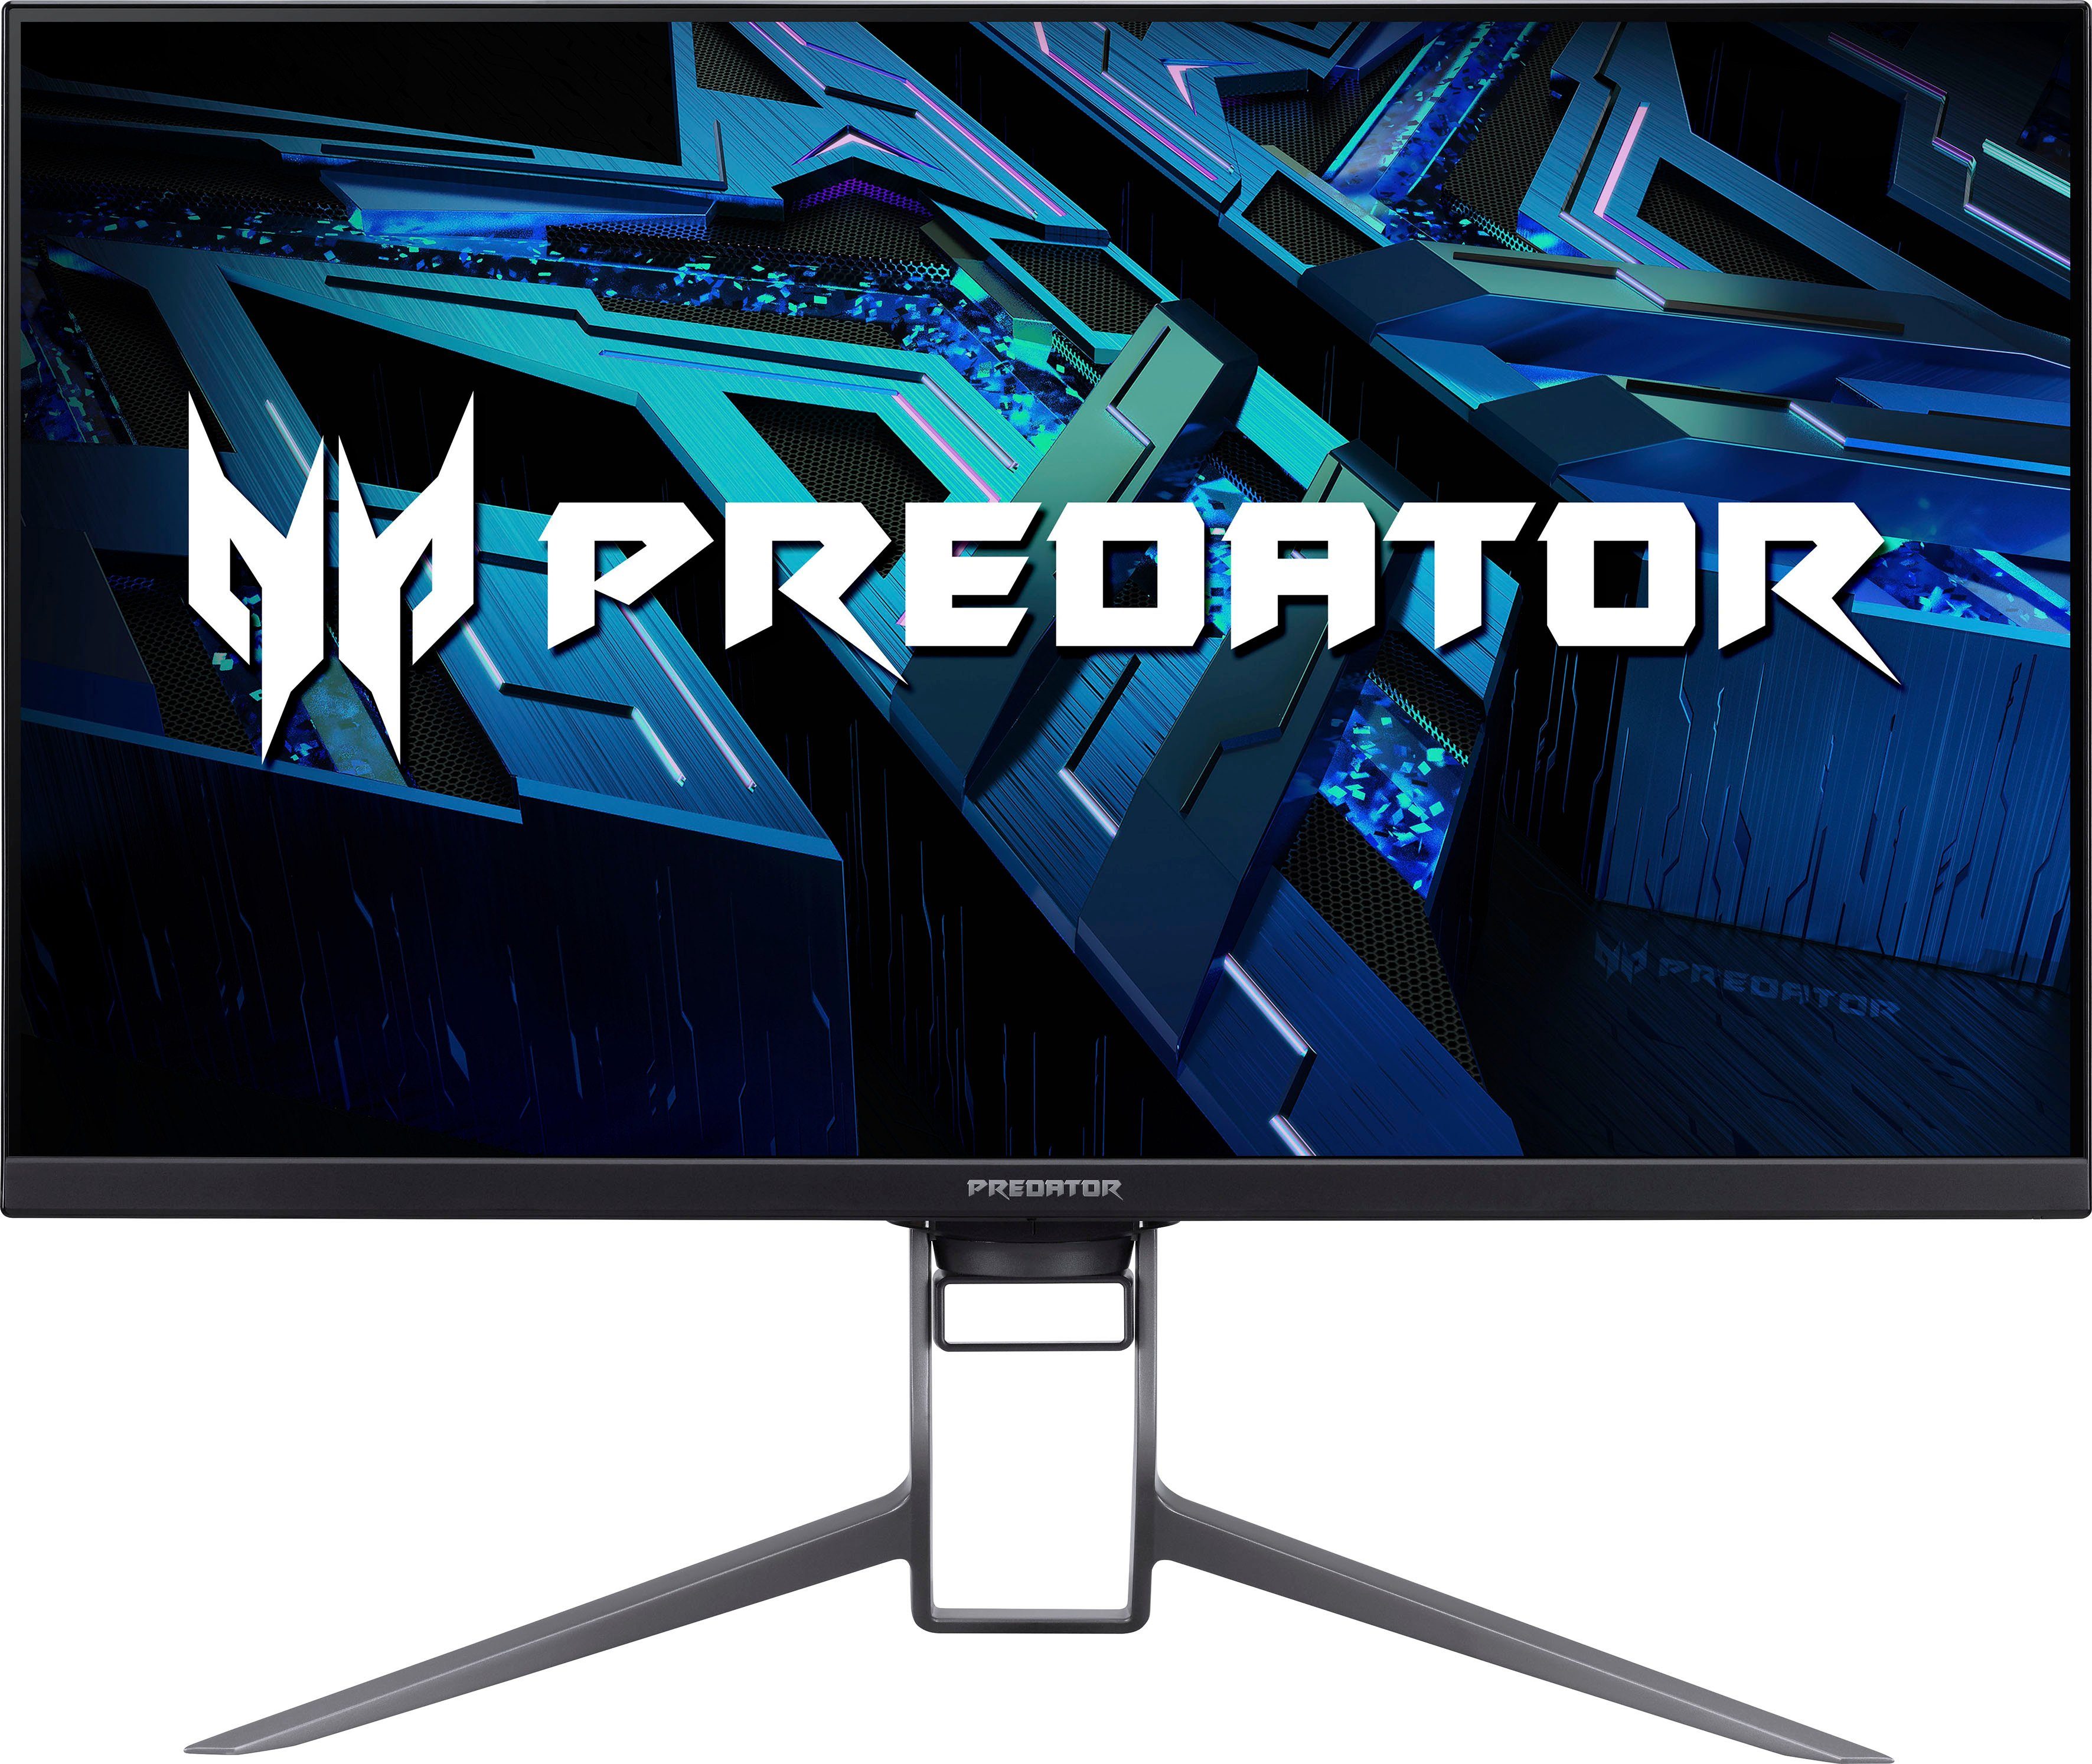 HDR Gaming-LED-Monitor 0,7 ", HD, 1000) 3840 Acer Reaktionszeit, 2160 cm/32 4K Ultra ms 160 px, Predator Quantum miniLED Dot Panel, LCD, x Hz, (81 FP X32